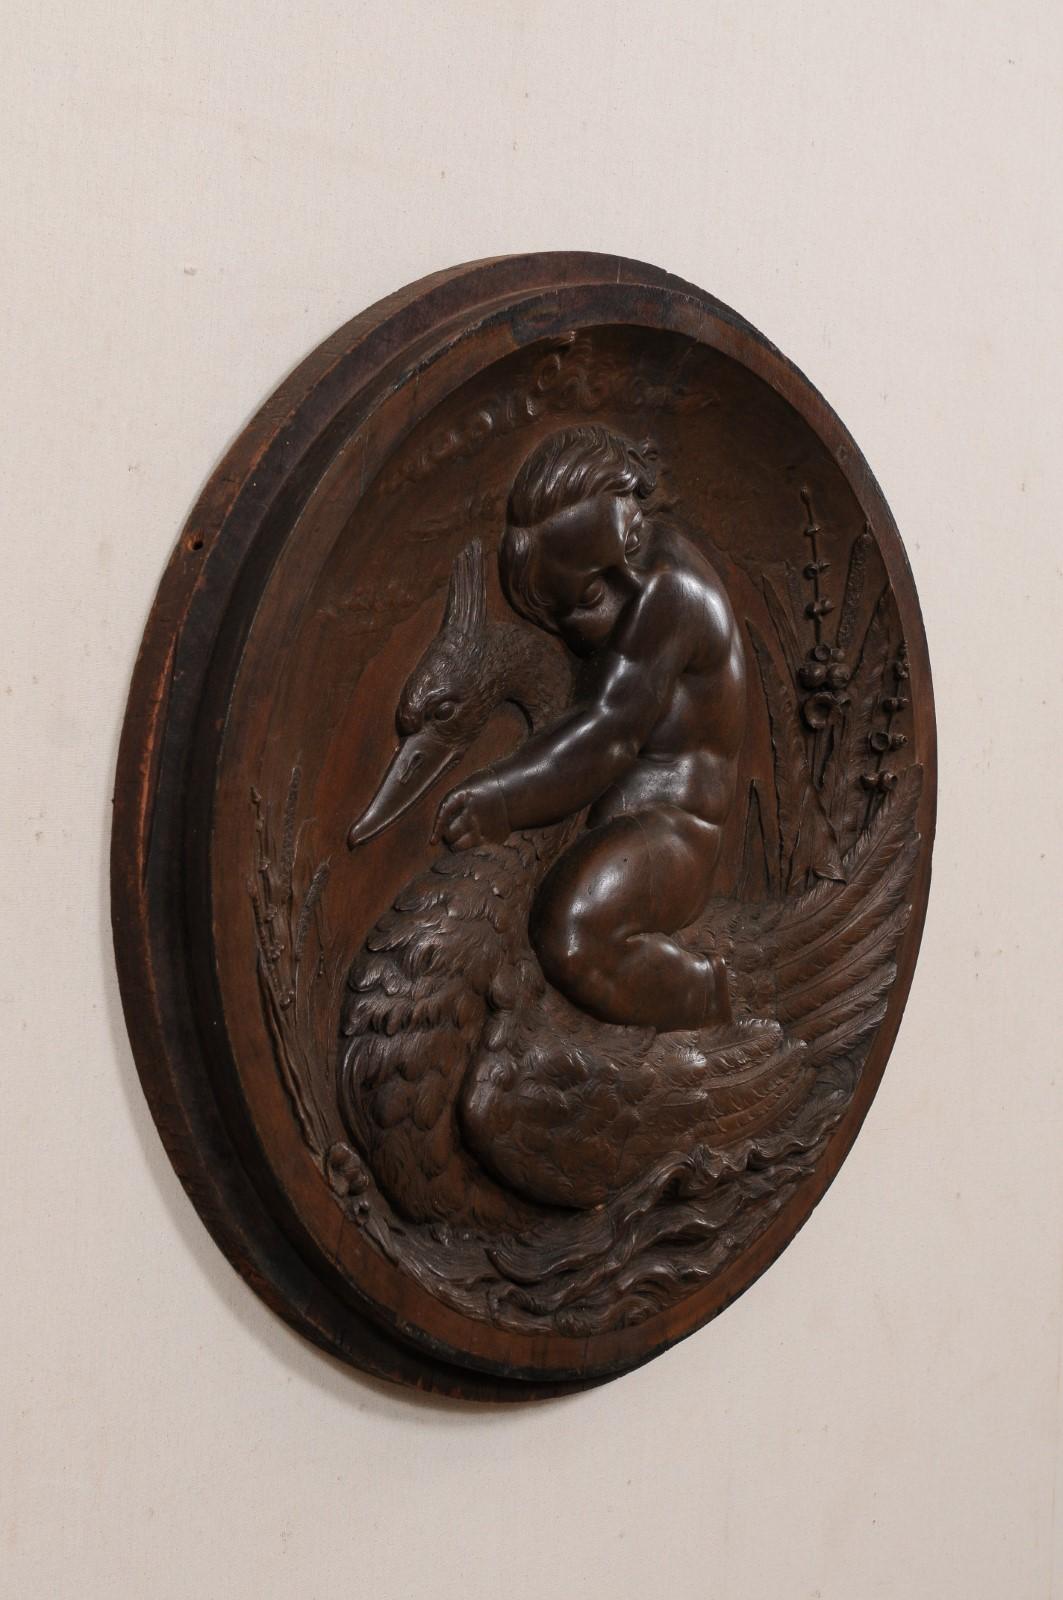 Italian Decorative Wall Plaque Carved with Putto & Water Fowl Early 19th Century For Sale 2